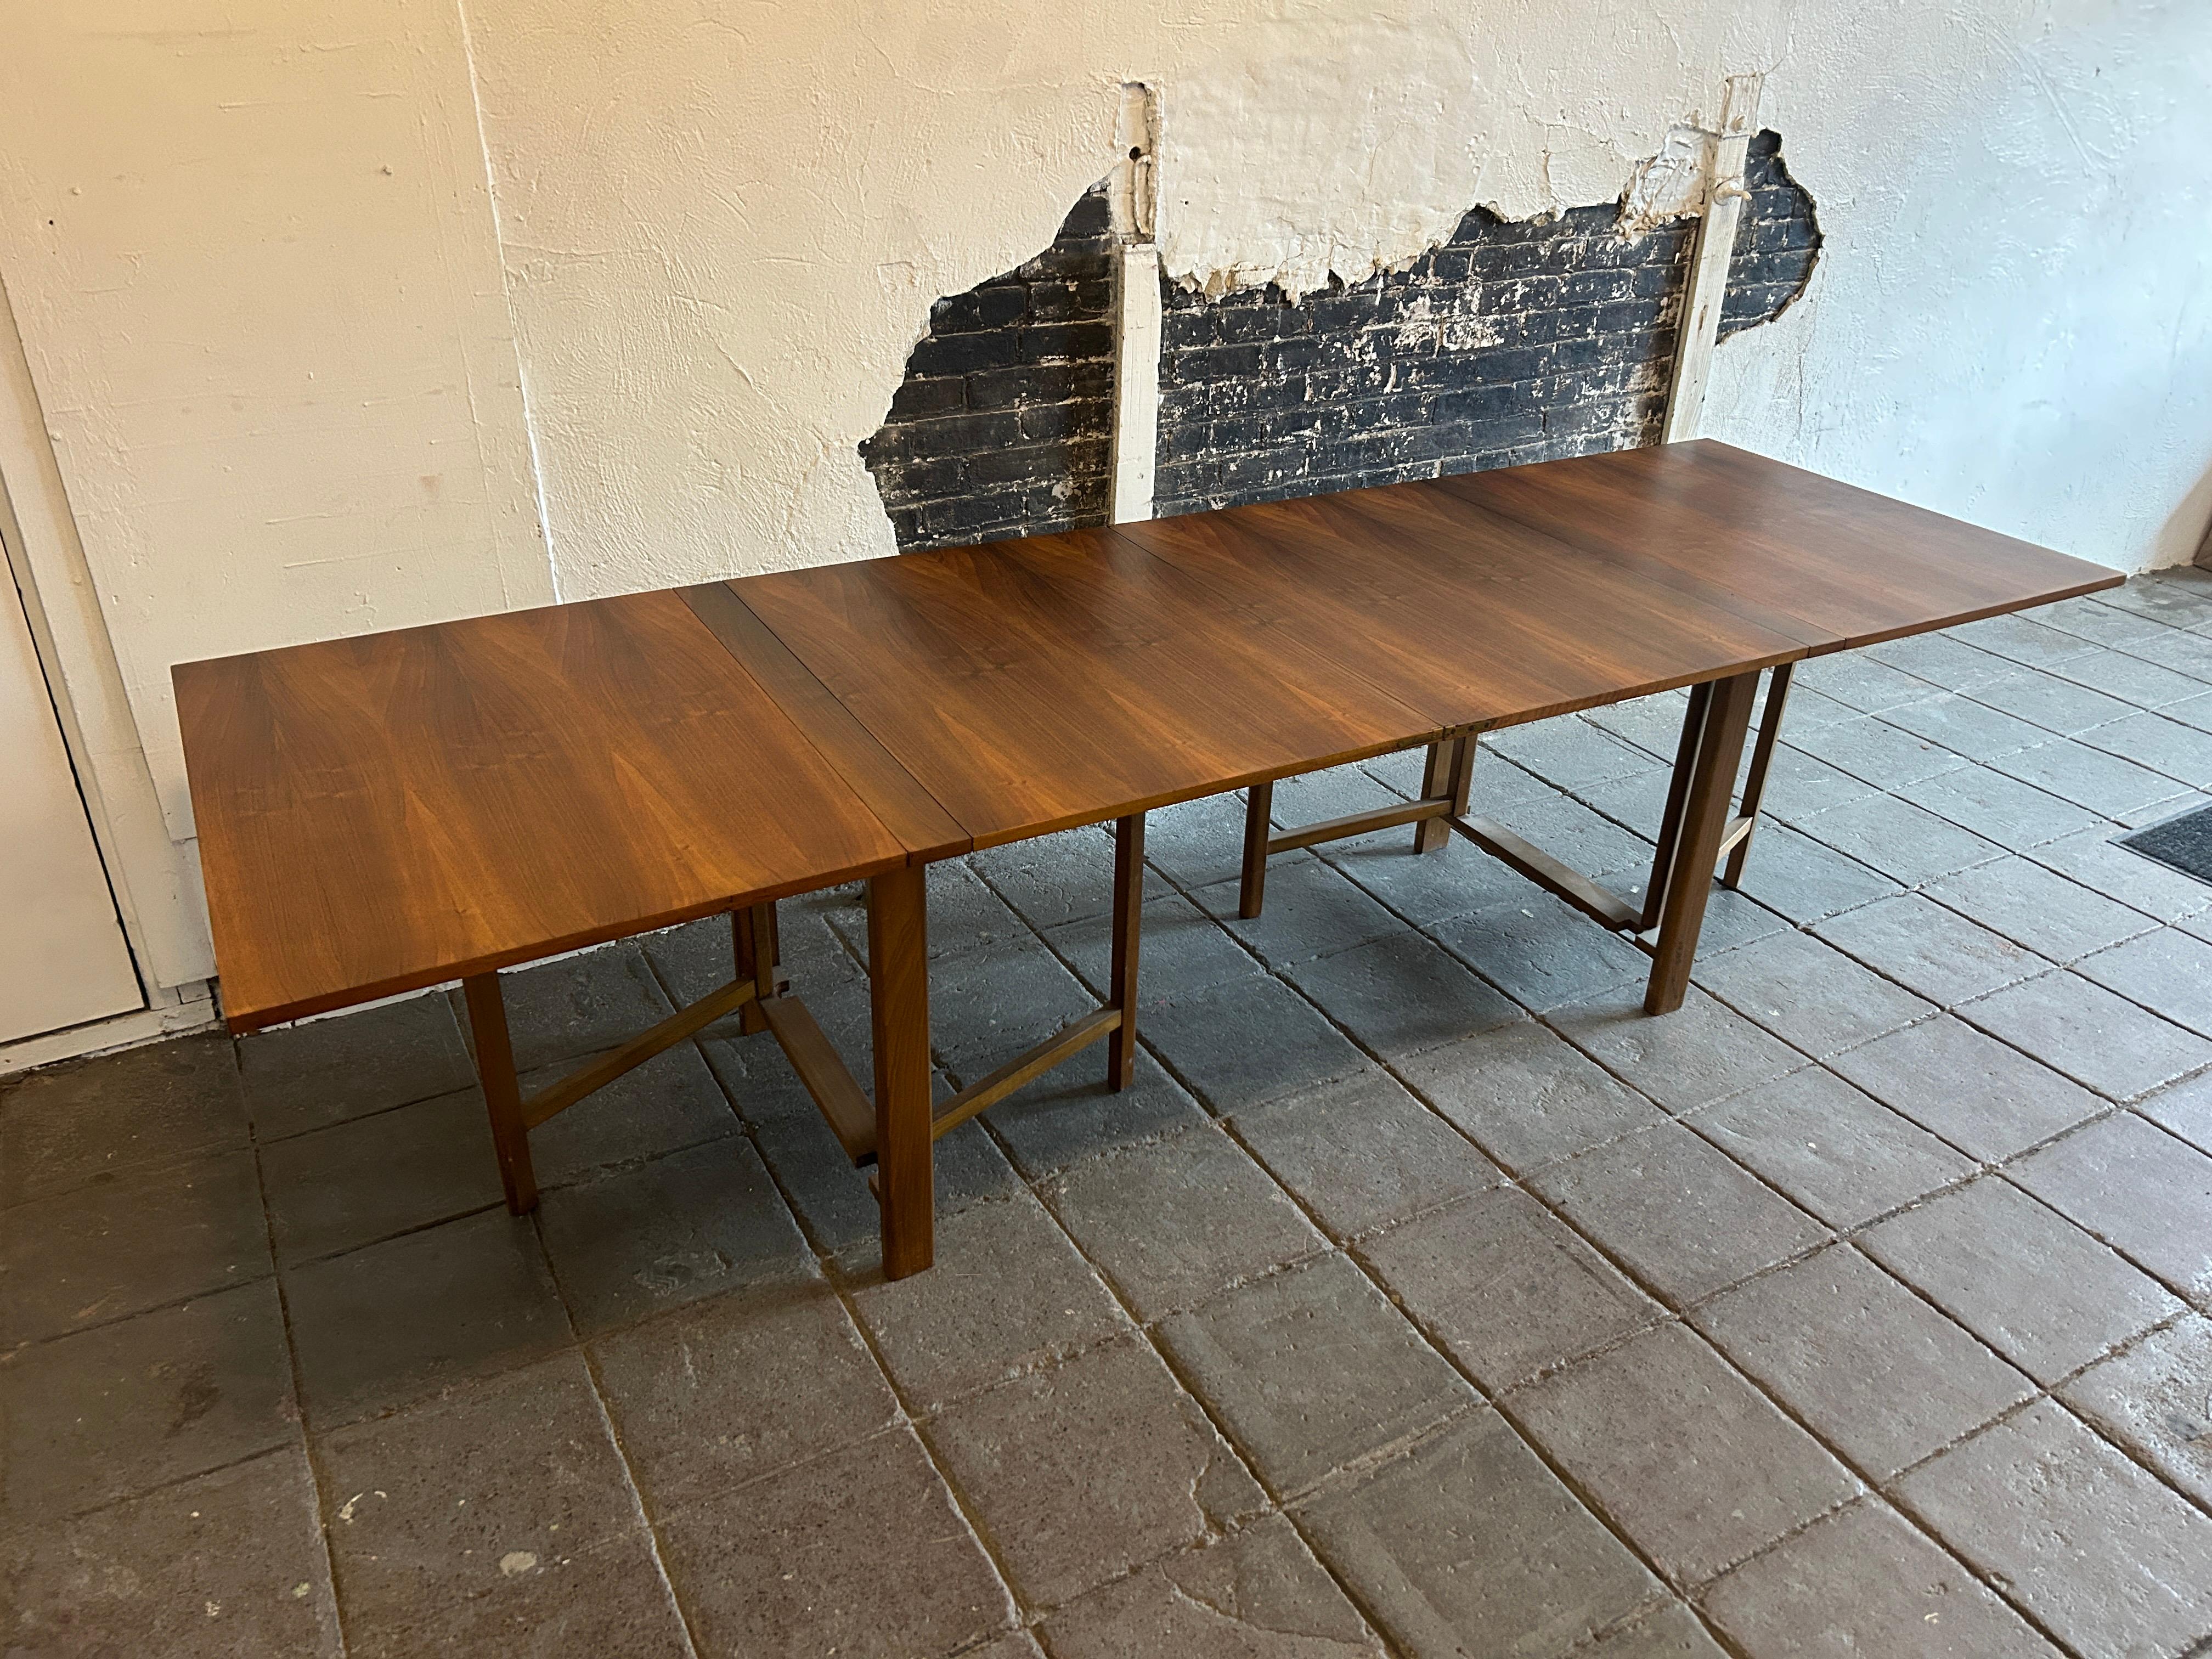 Mid-Century Modern Maria folding extension dining table by Bruno Mathsson. Table is teak wood medium brown finish with brass hardware. Good vintage condition - nice grain in veneer top. Table folds down very small to stow away while not using. Made